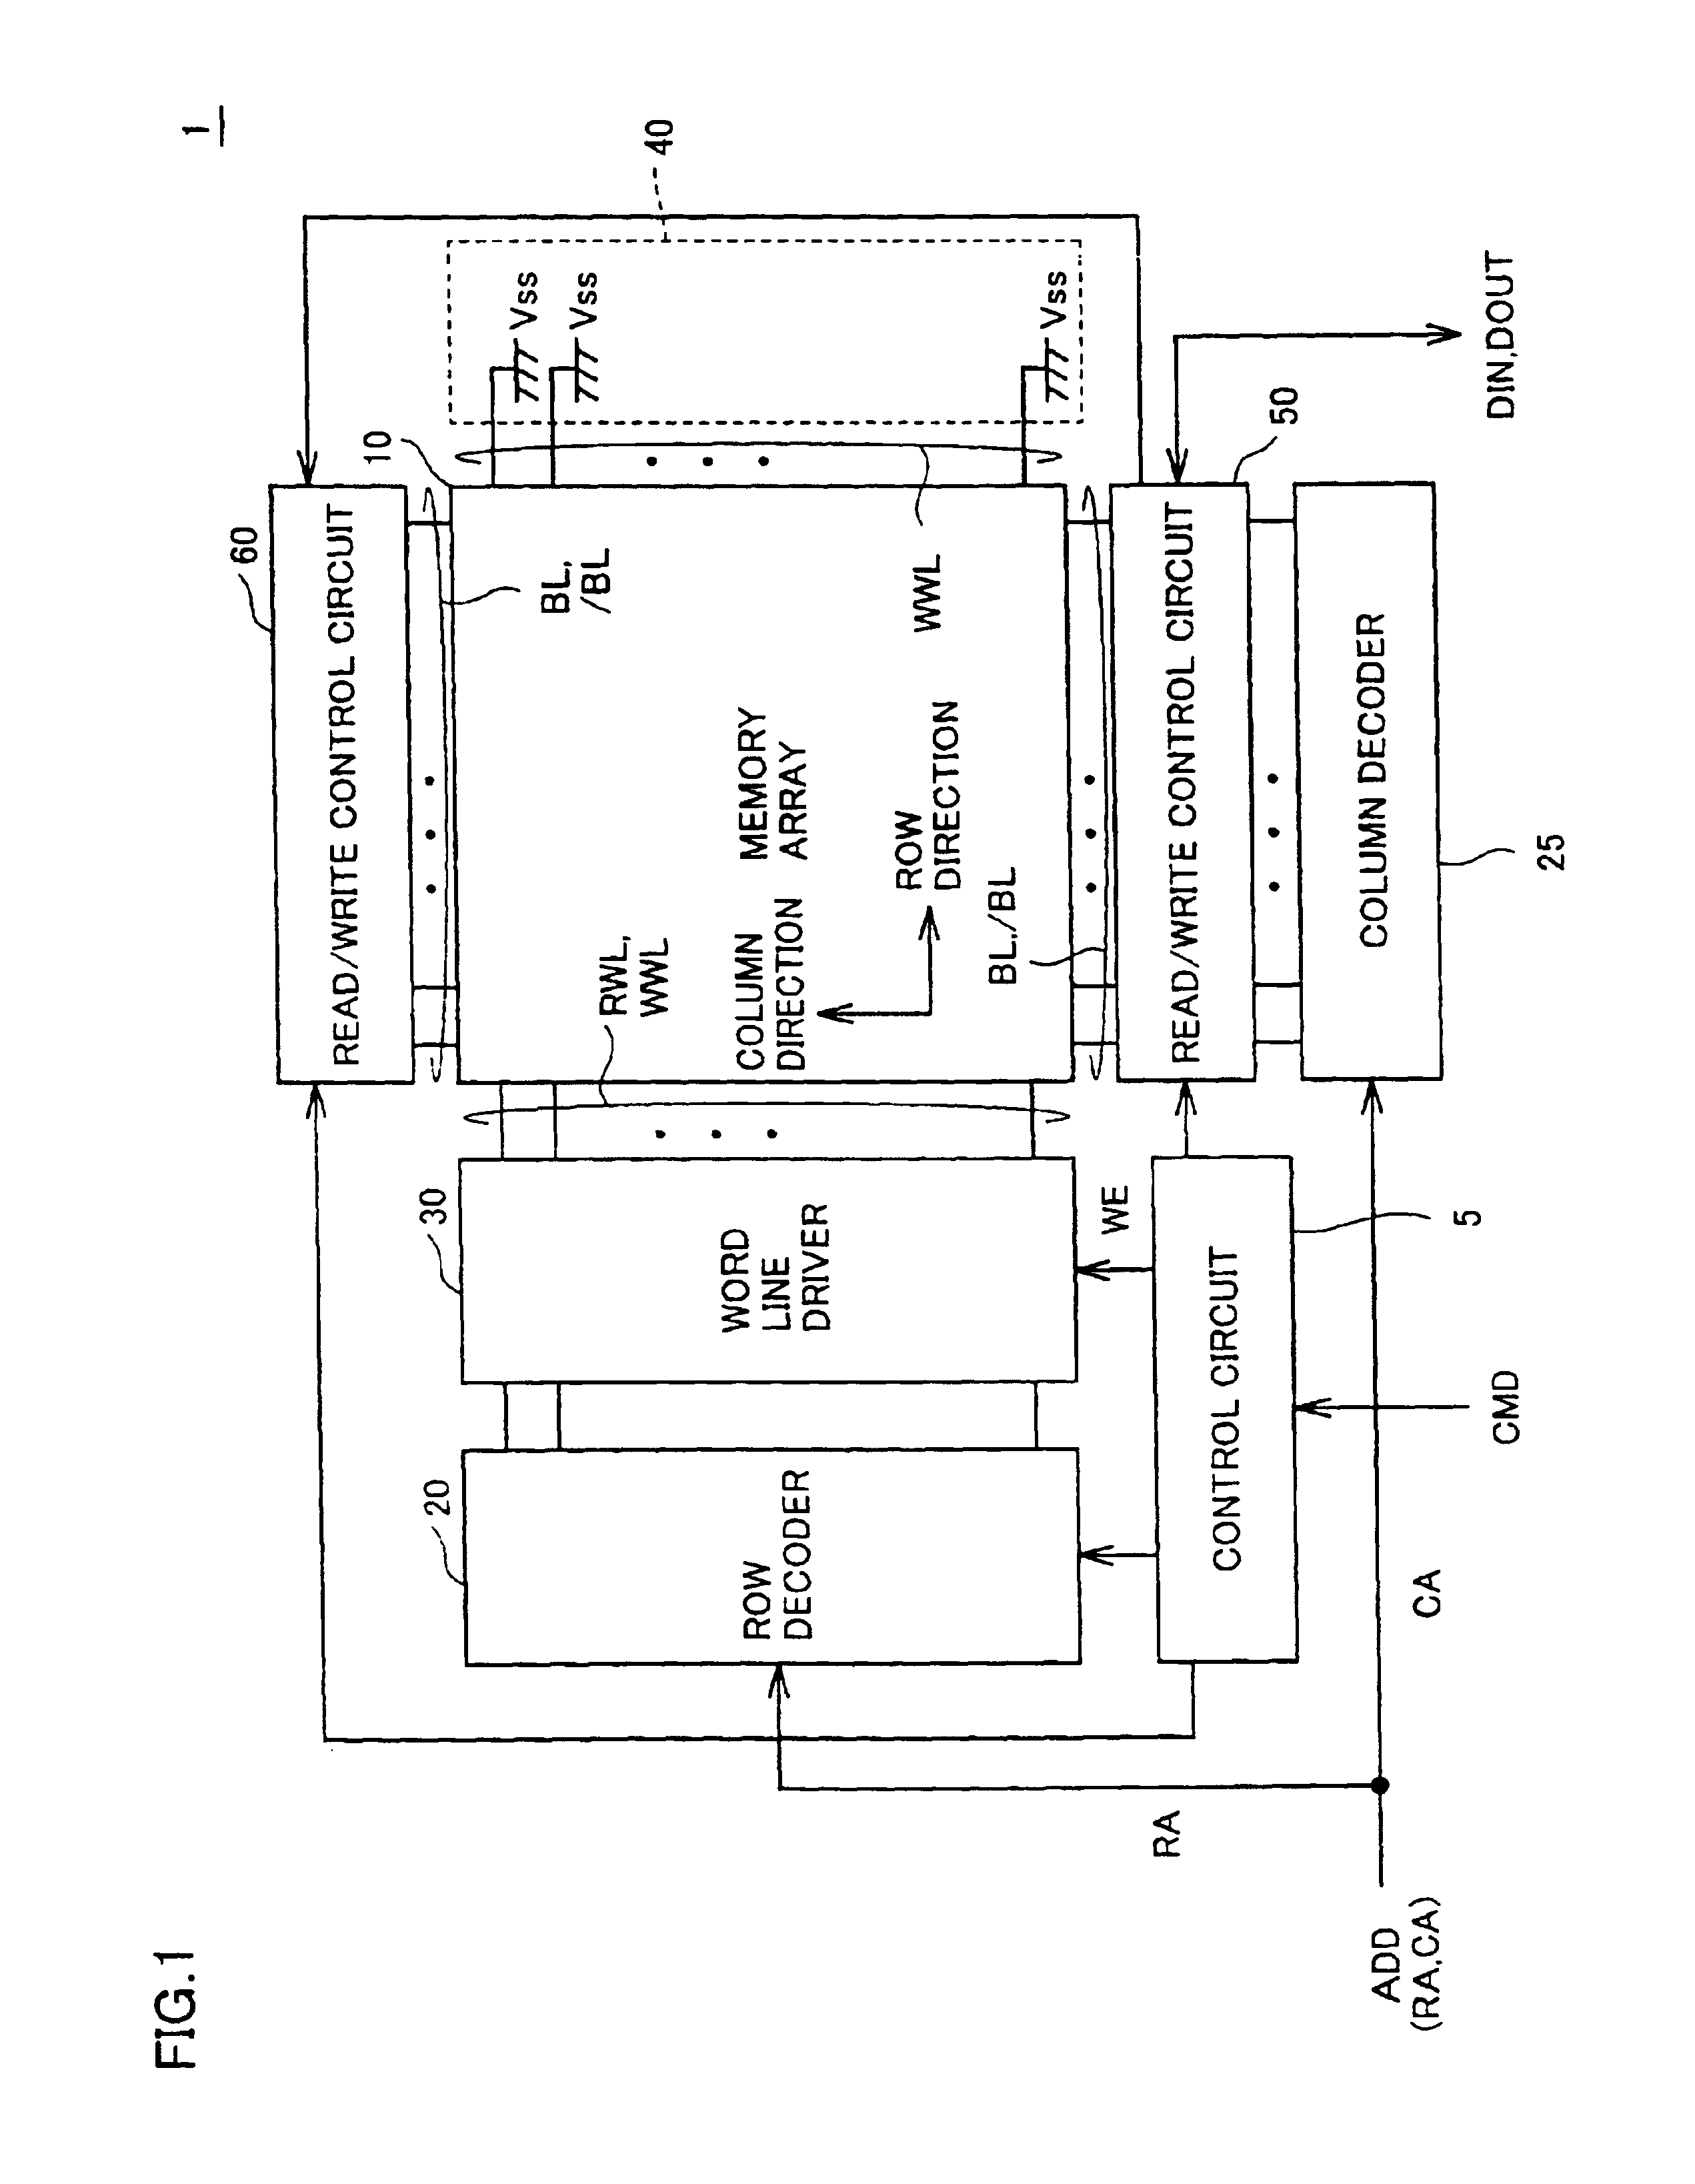 Thin film magnetic memory device having data read current tuning function